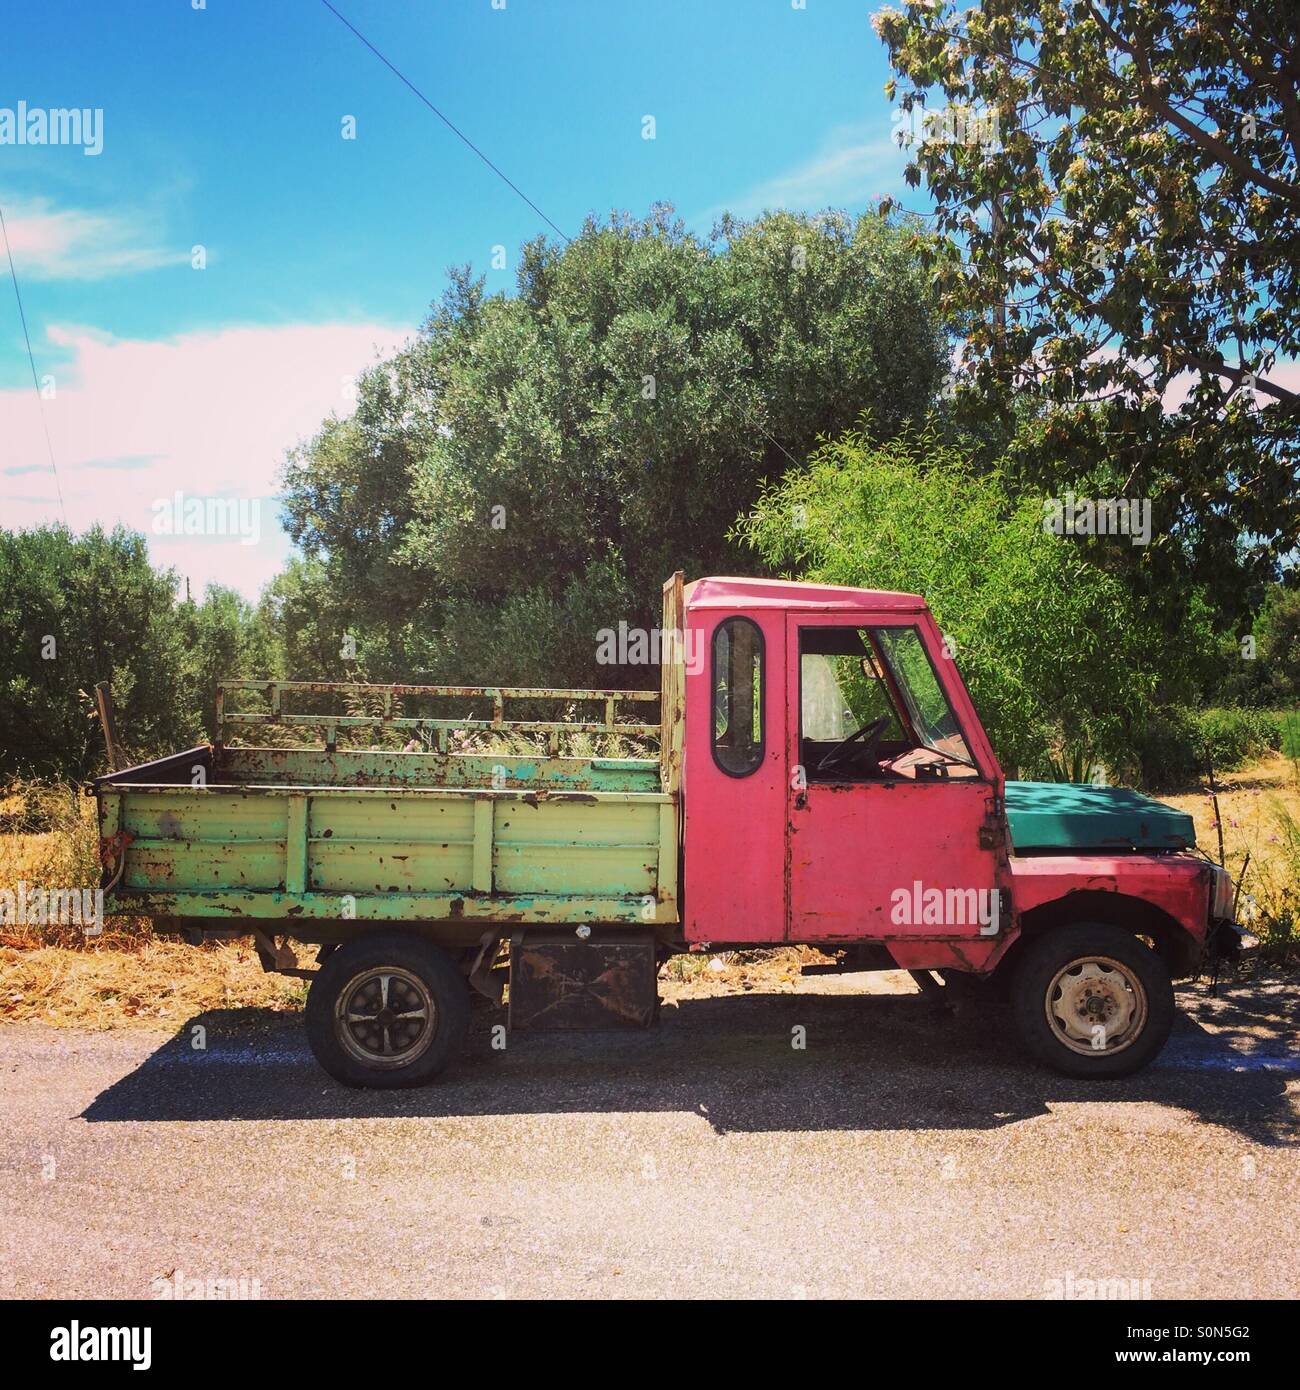 A colorful old pick-up truck in Kefalonia, Greece. Stock Photo